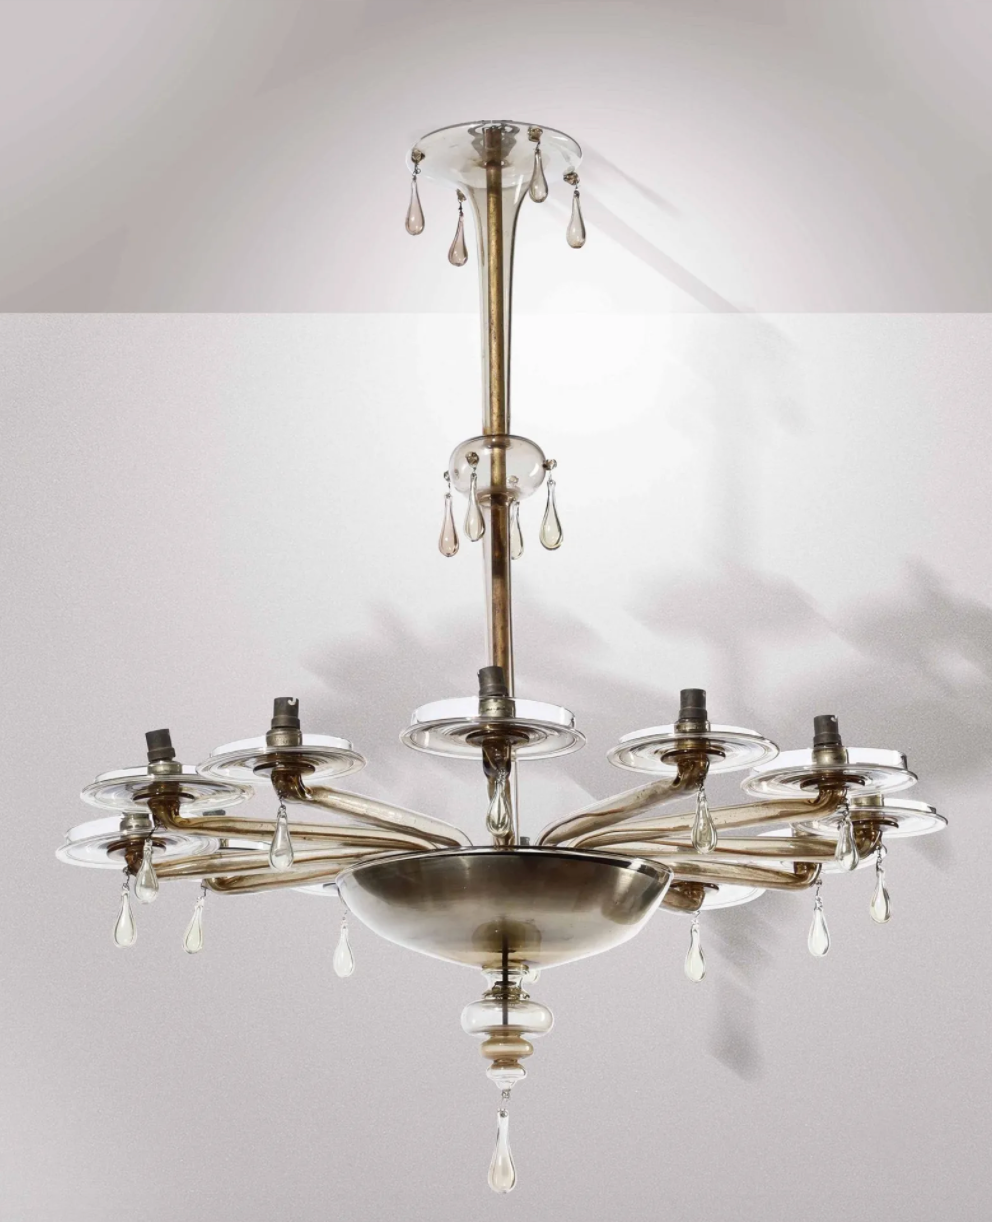 A Murano 10 arm chandelier.